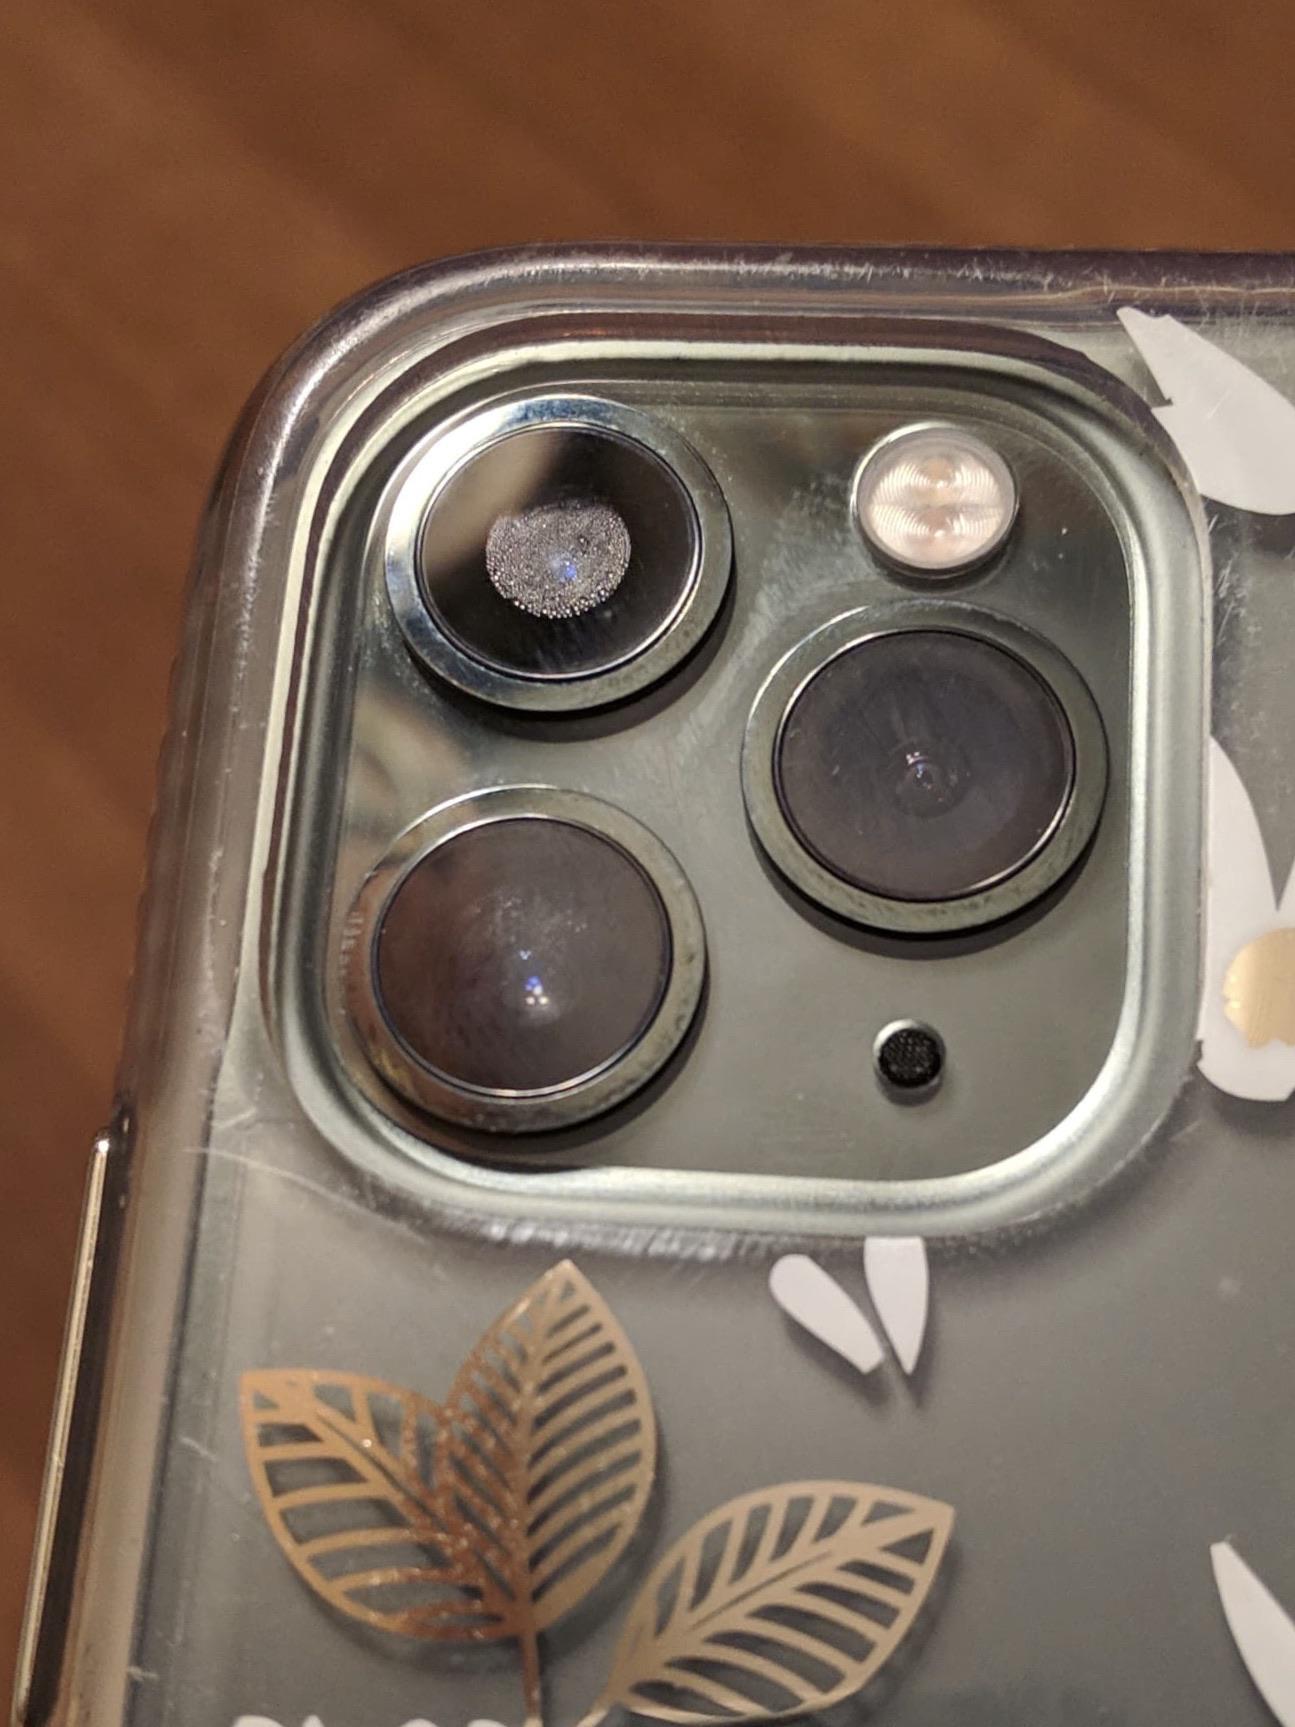 iPhone 11 pro camera has condensation without being